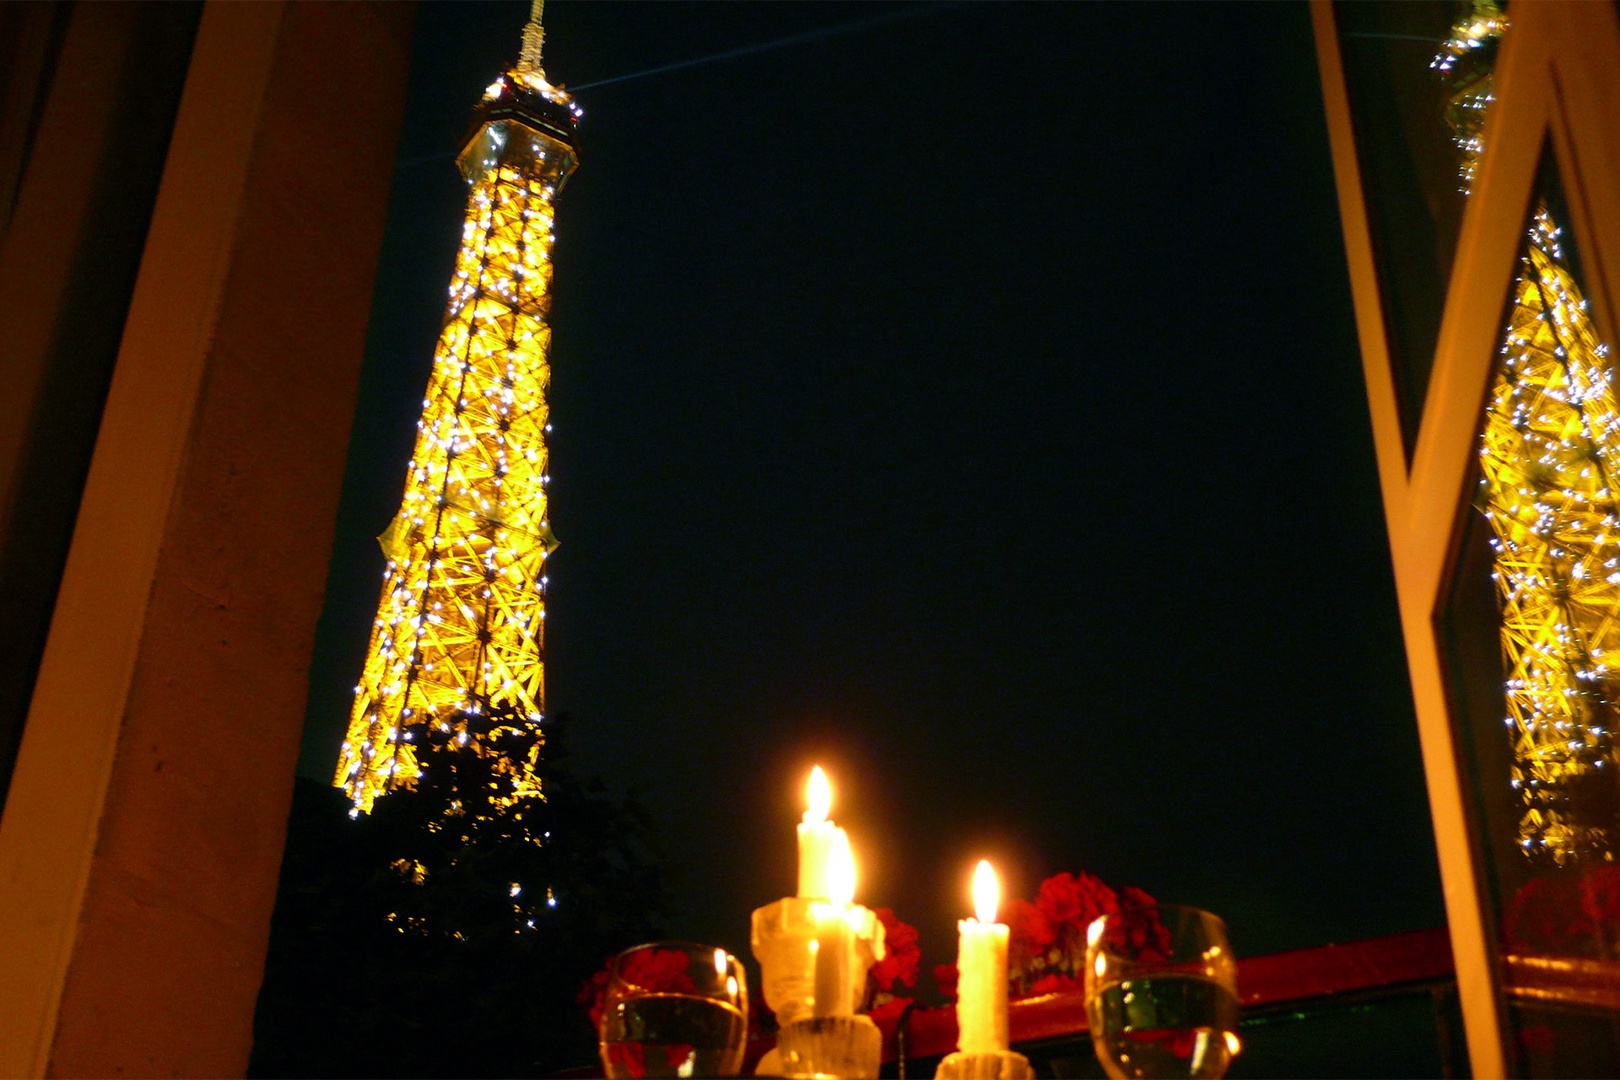 Marvel at the Eiffel Tower lights from your Paris rental!